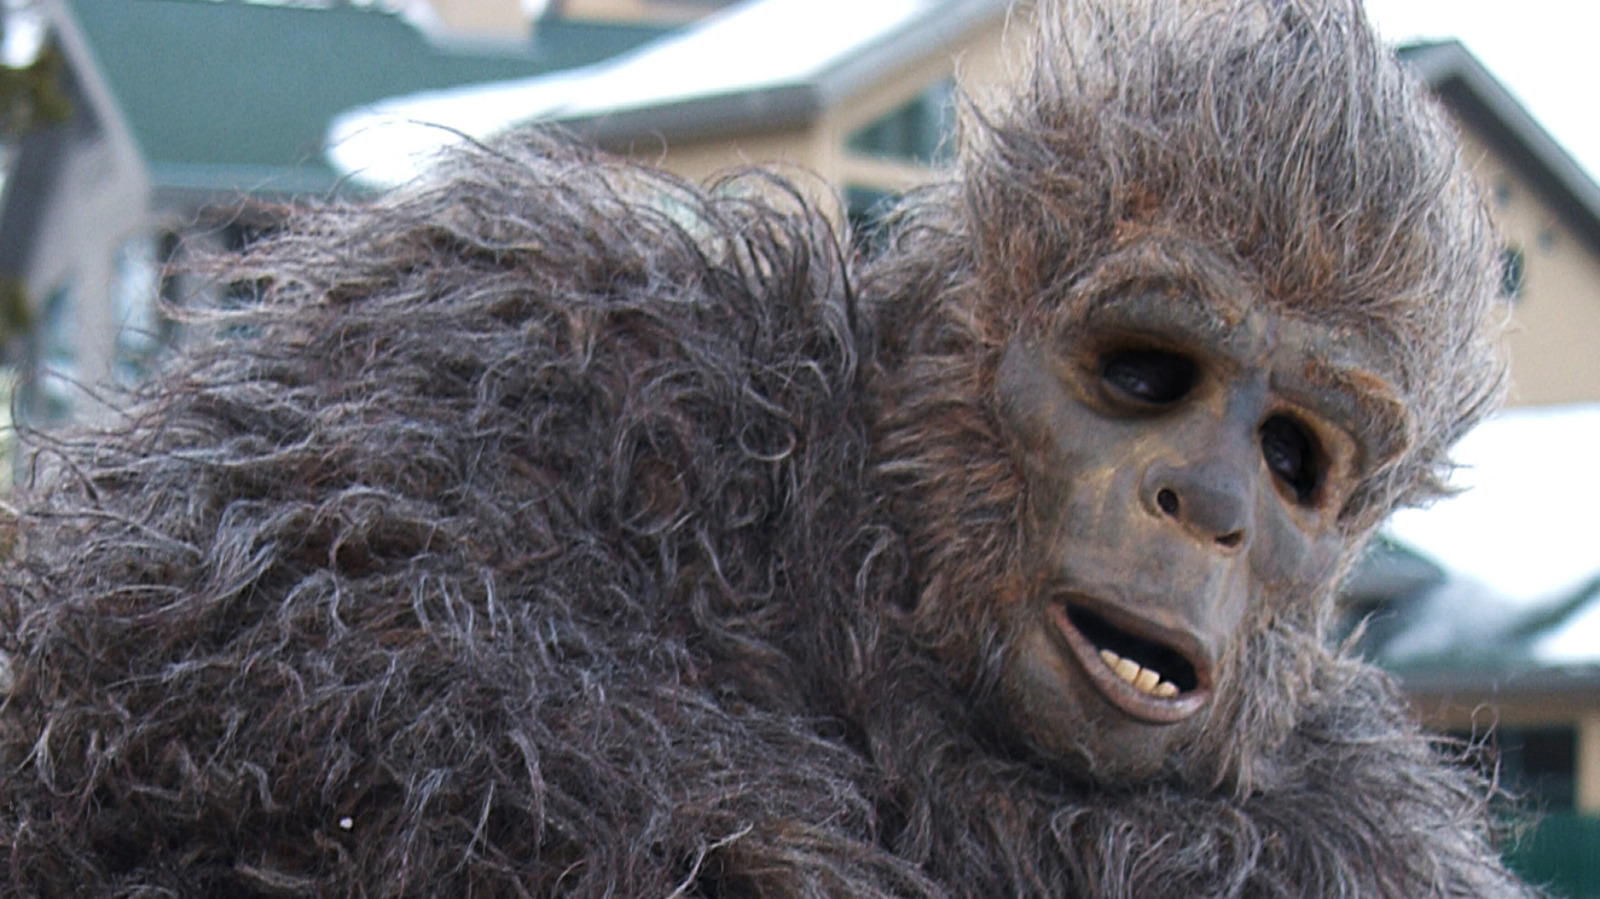 Who Was The First Person To Claim A Sasquatch Sighting?